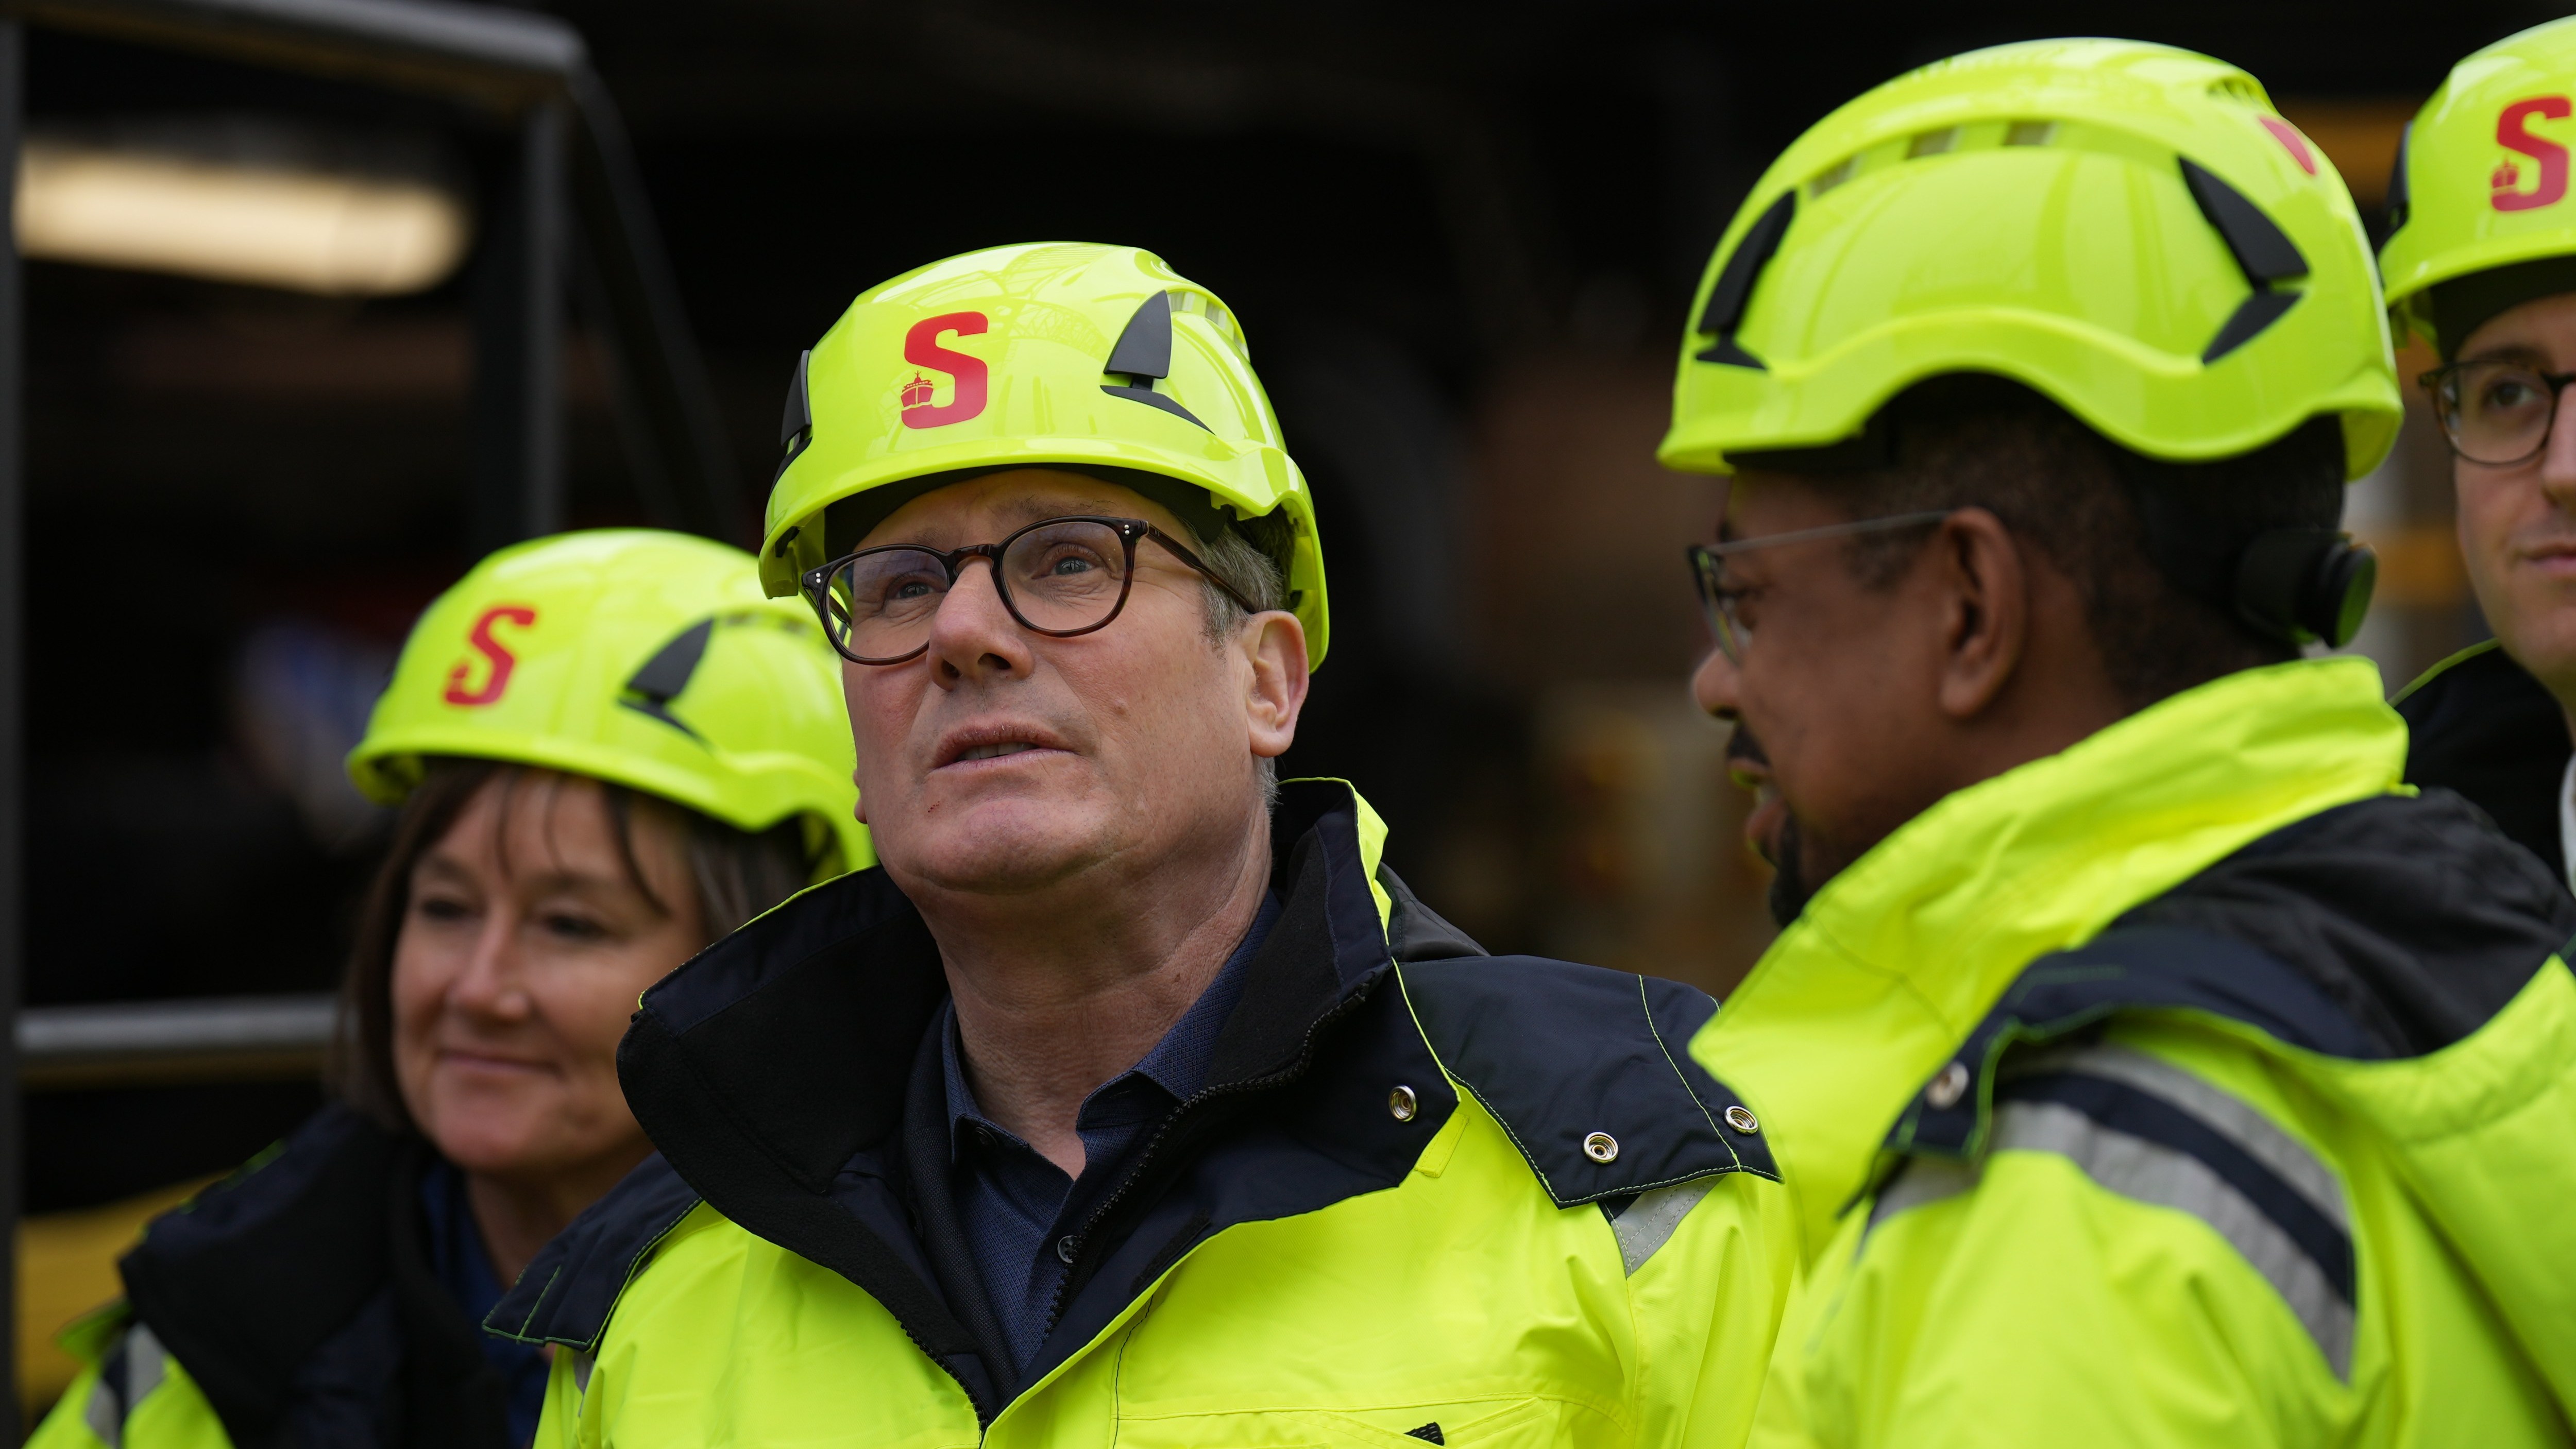 Sir Keir Starmer and Vaughan Gething, the Welsh first minister, tour an offshore platform for wind turbine construction in Holyhead, north Wales, this week